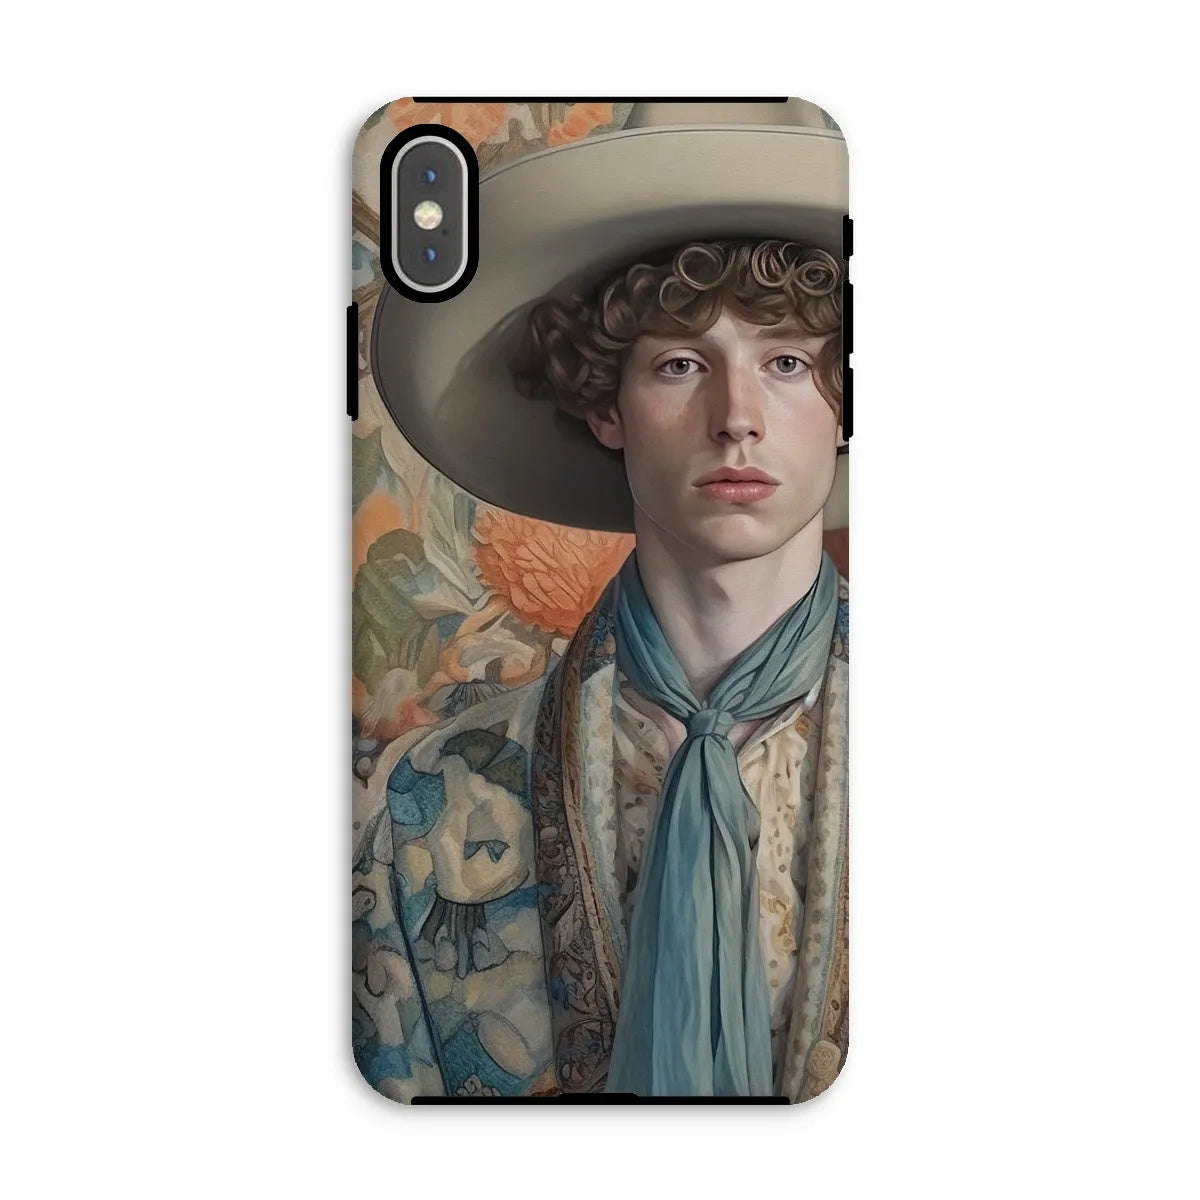 Theodore The Gay Cowboy - Dandy Gay Men Art Phone Case - Iphone Xs Max / Matte - Mobile Phone Cases - Aesthetic Art